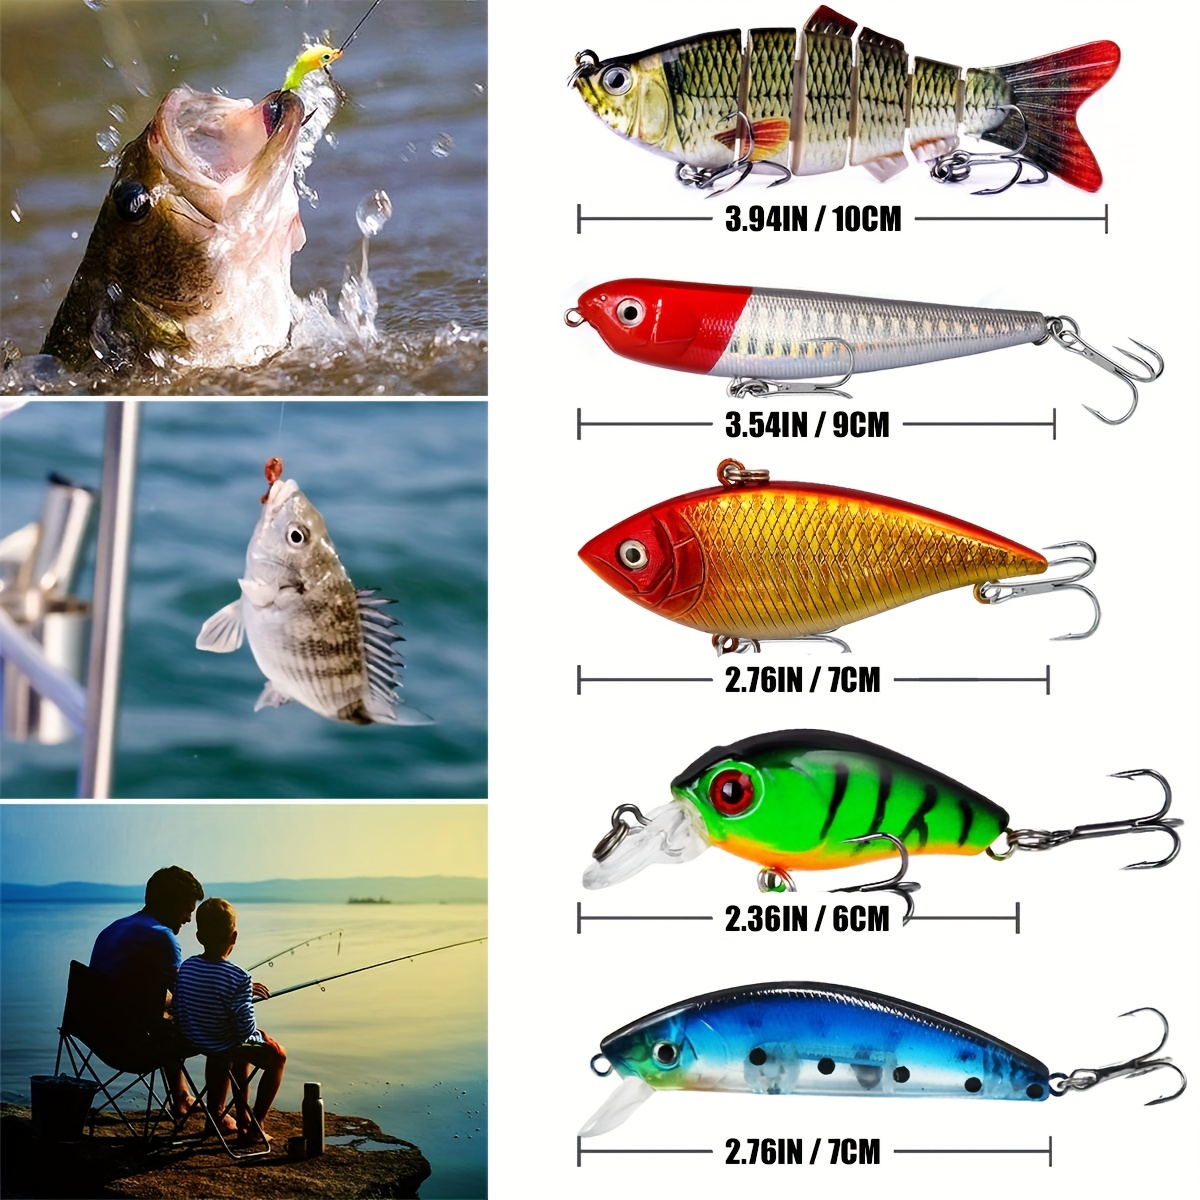 WDG 85Pcs Fishing Lures Kit, Bass Trout Fishing Baits Accessories Including  Lures Hook, Plastic Worms, Crank Bait, Top Water Lures, Fishing Pliers